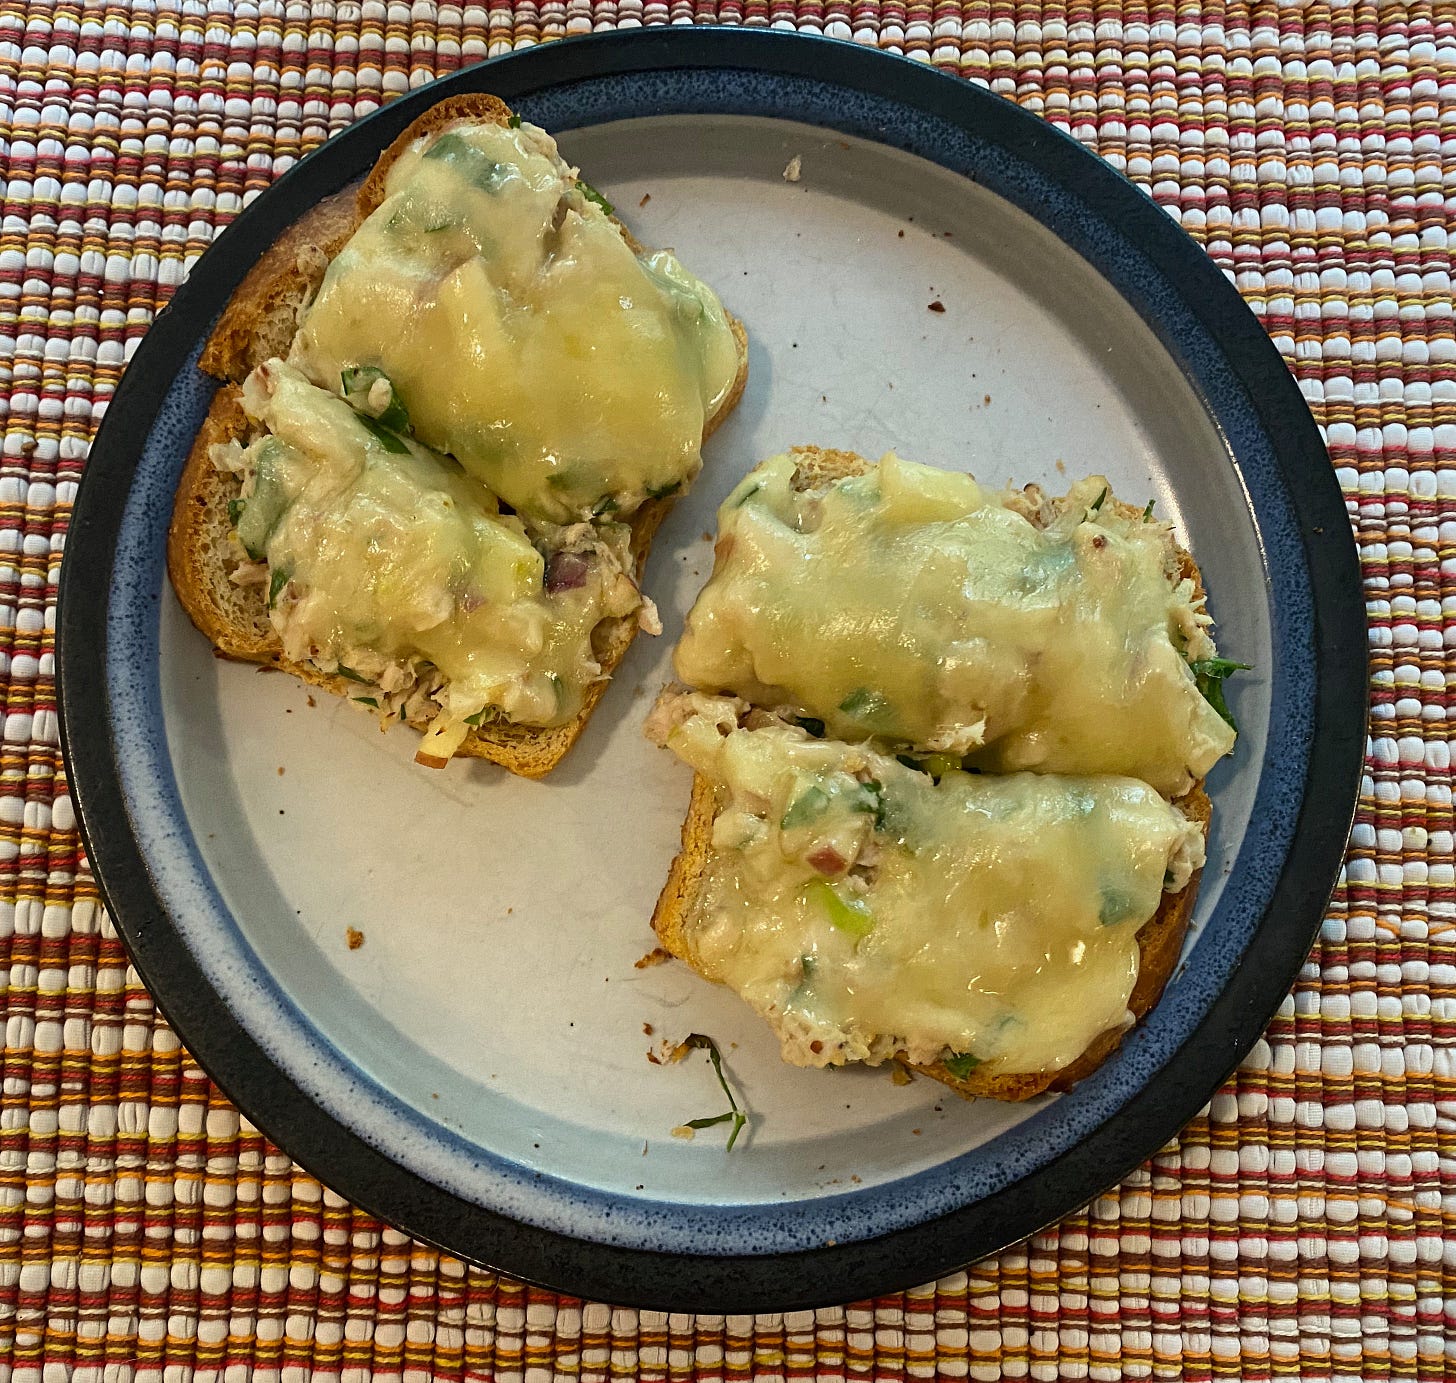 A small ceramic plate with two open-faced tuna melts cut in half.